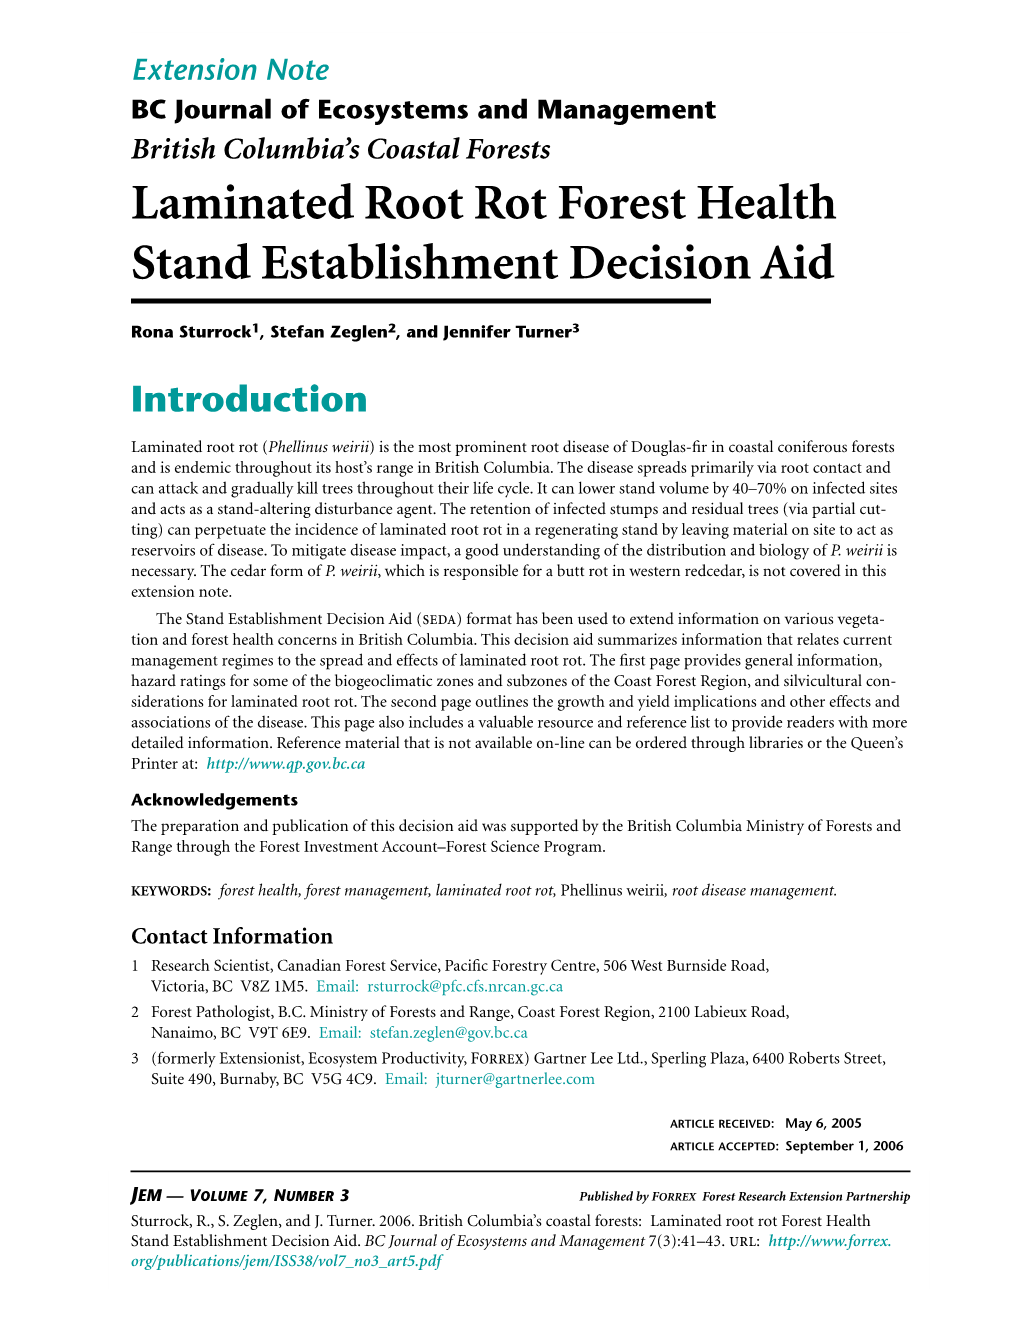 Laminated Root Rot Forest Health Stand Establishment Decision Aid